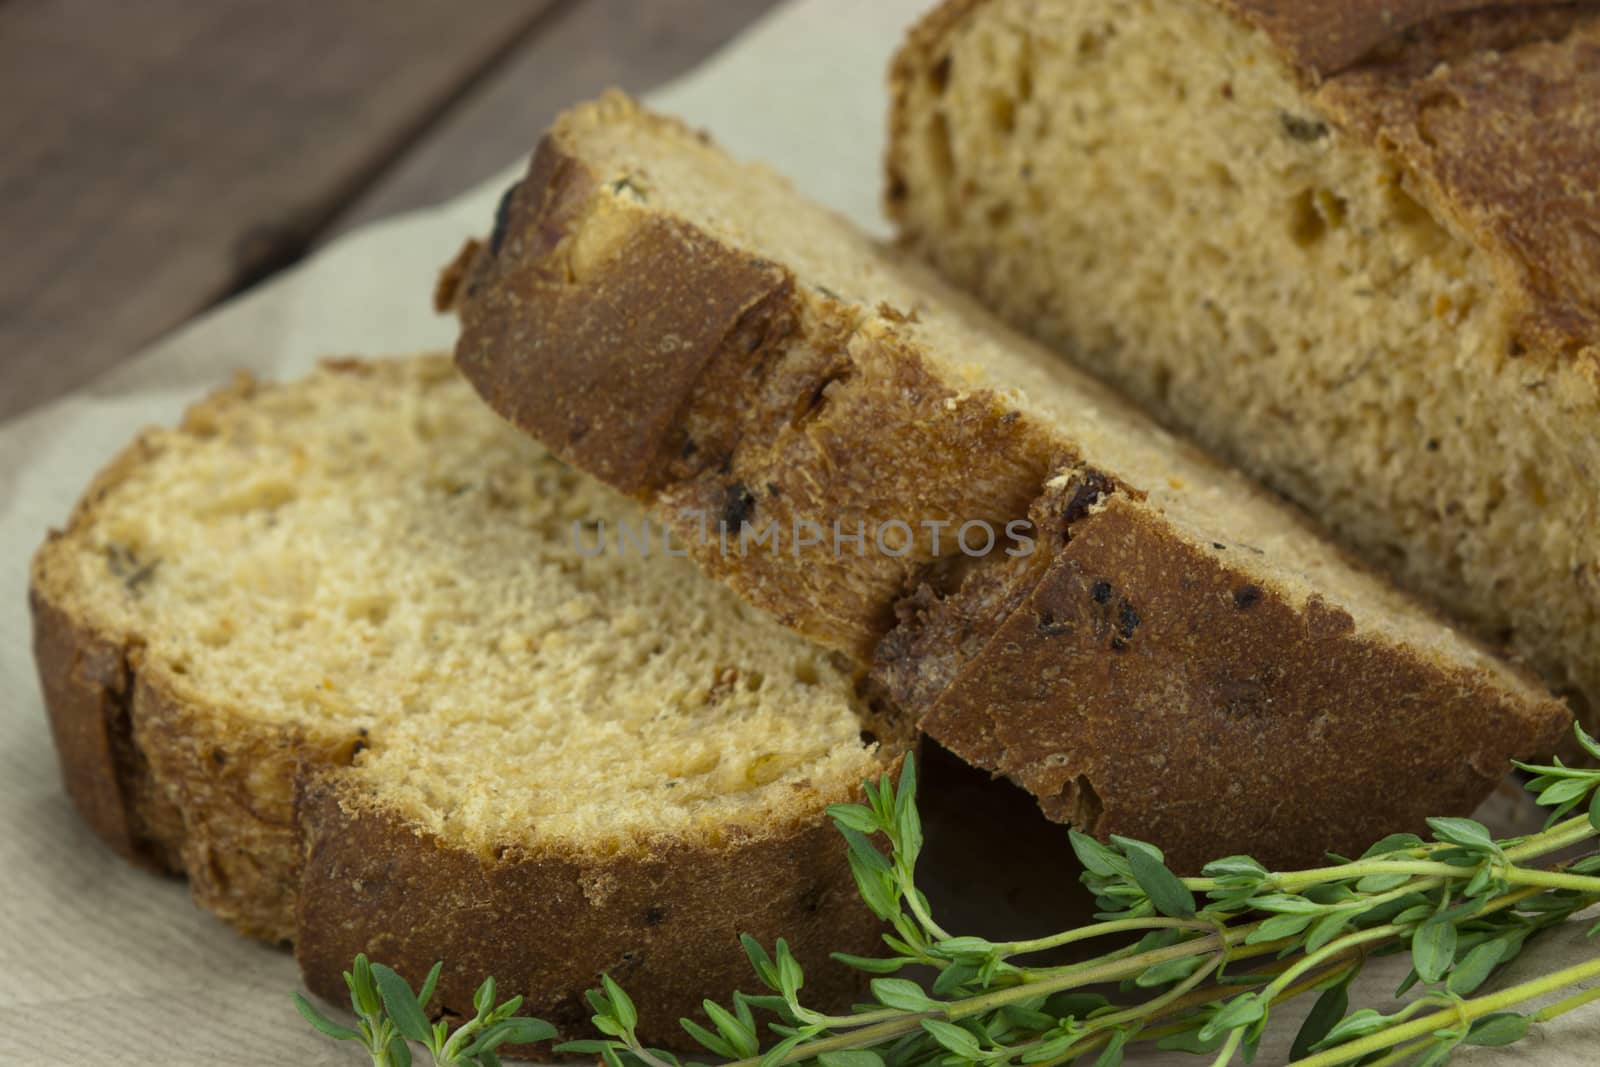 Wholemeal bread on brown paper by christopherhall